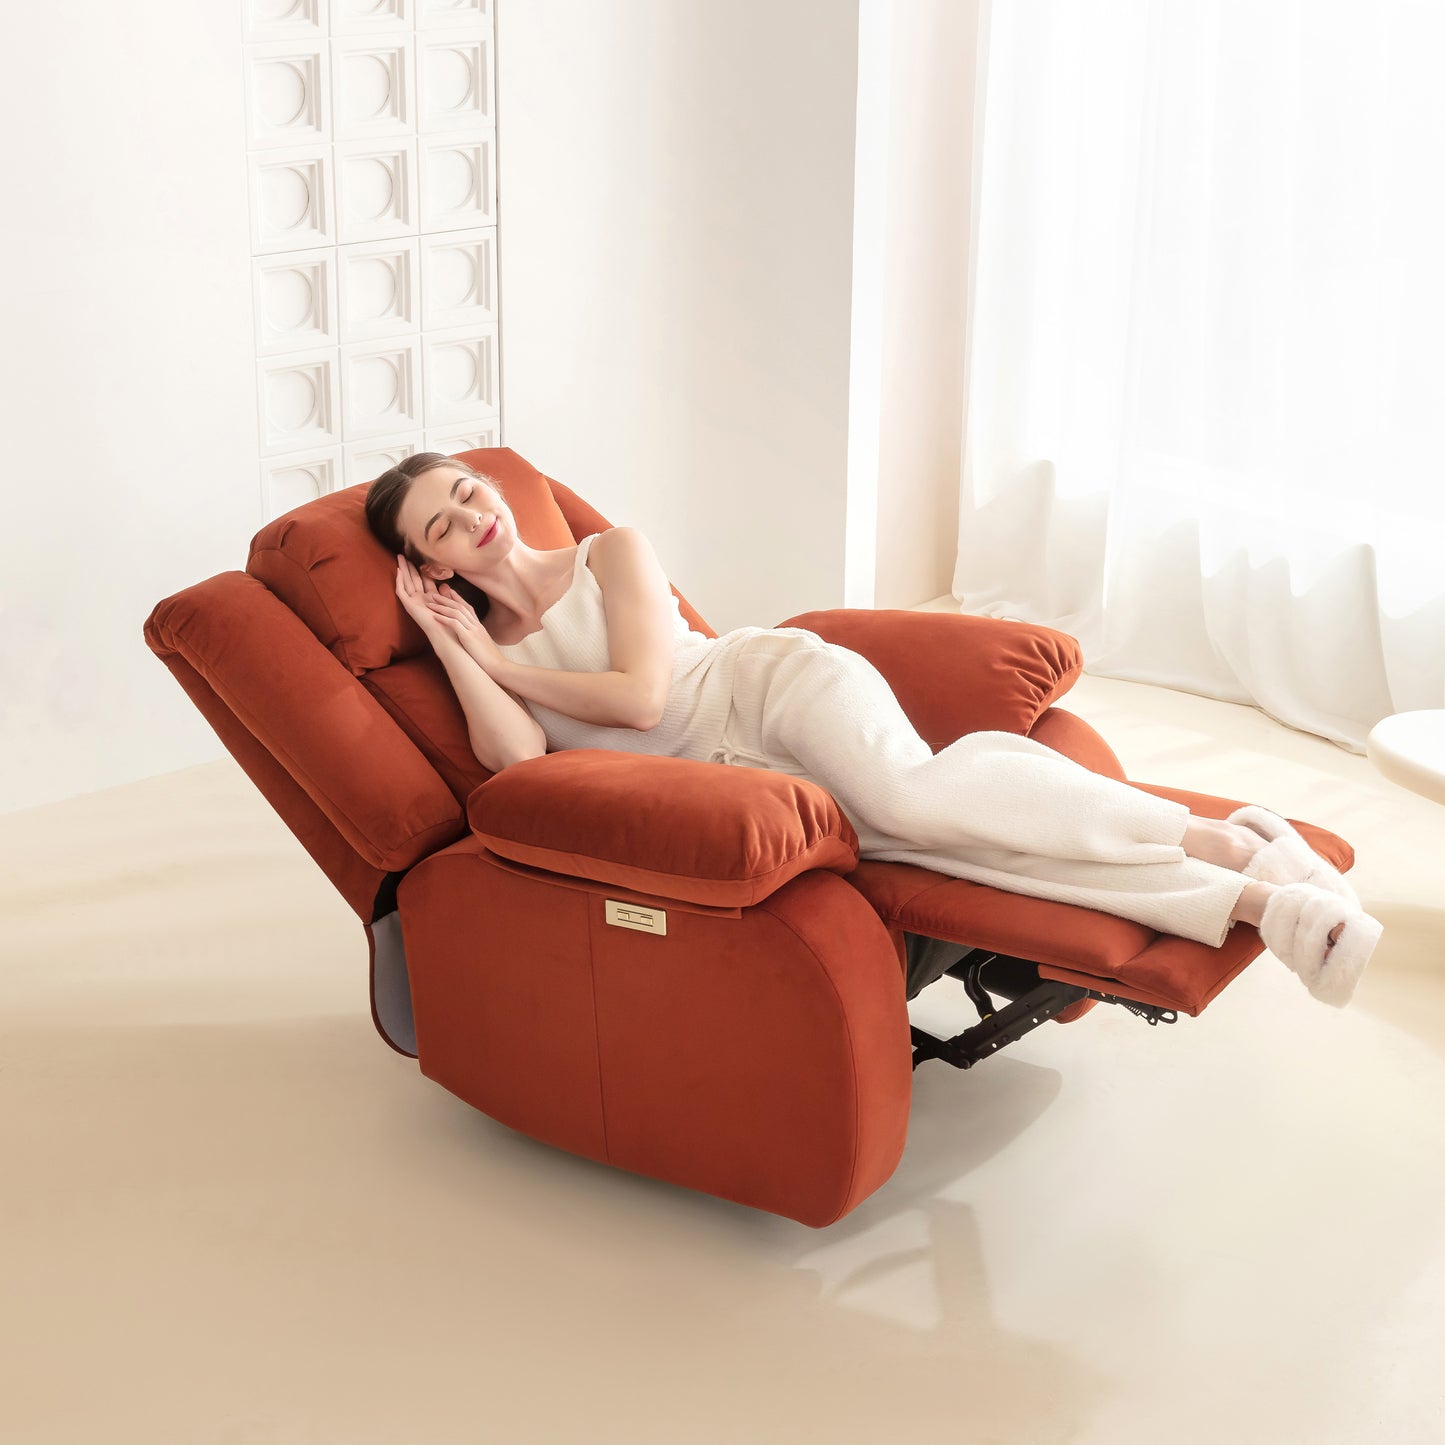 EGO Adjustable Padded Seat Recliner Chair